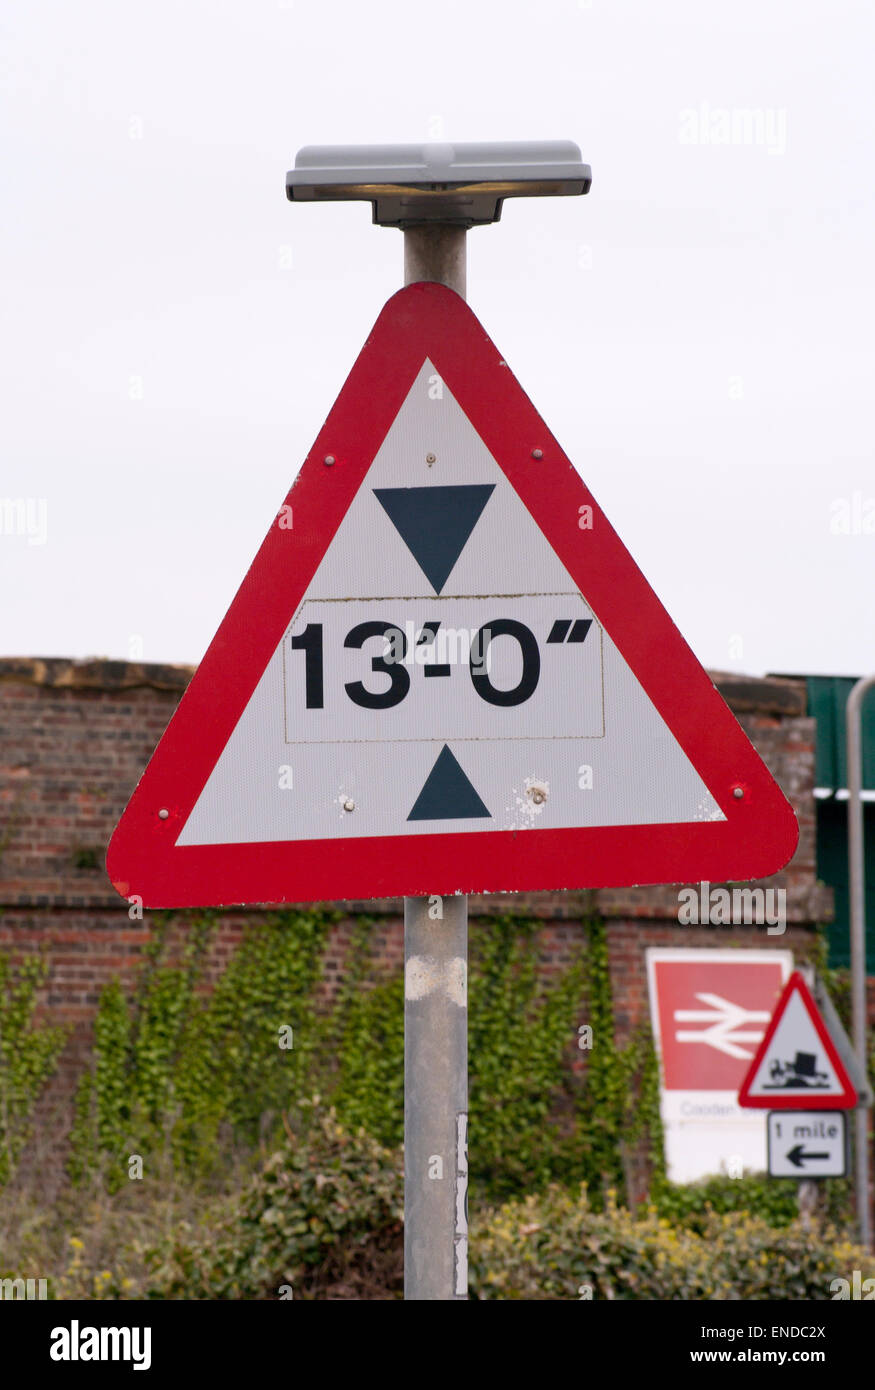 Triangular Road Sign 13 foot Height Restriction Stock Photo